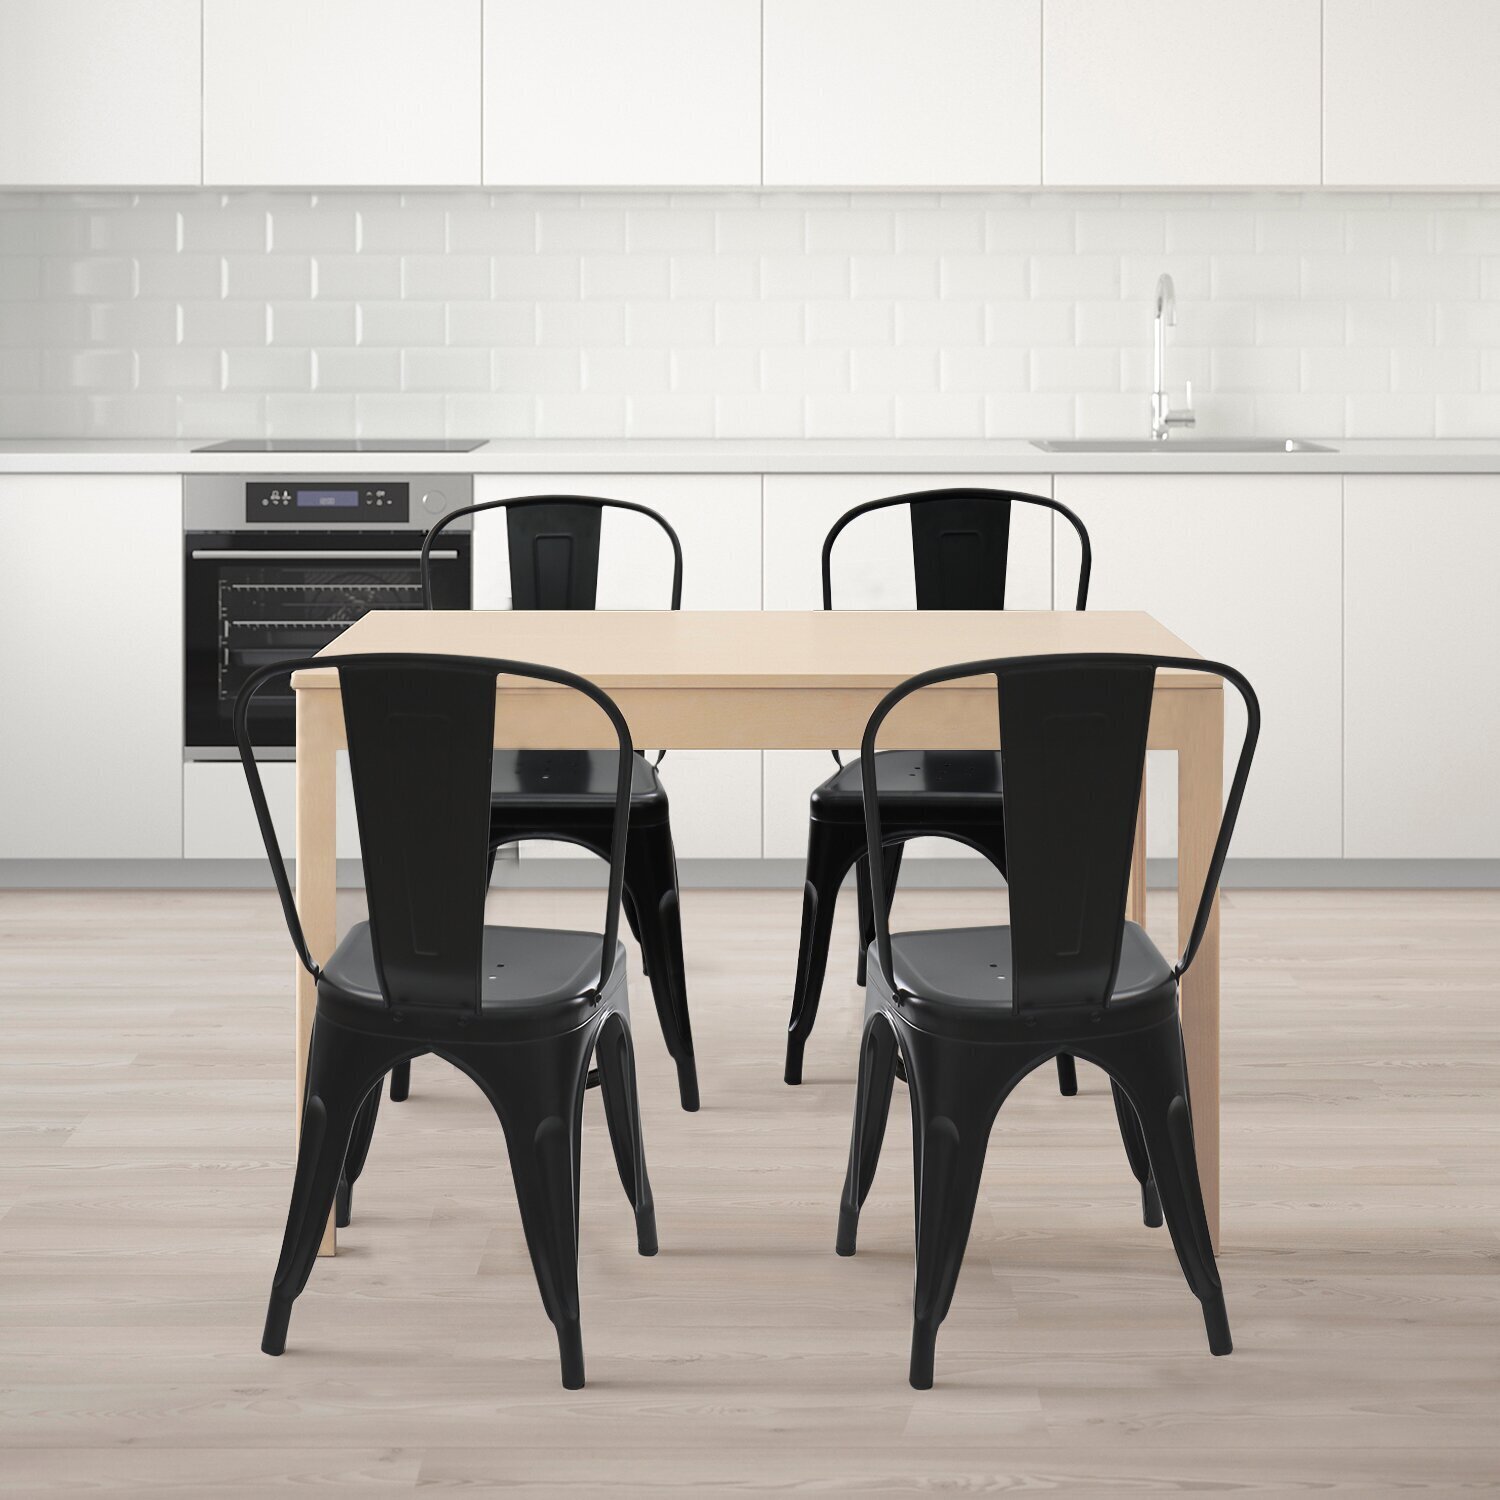 Strong dining chairs in metal